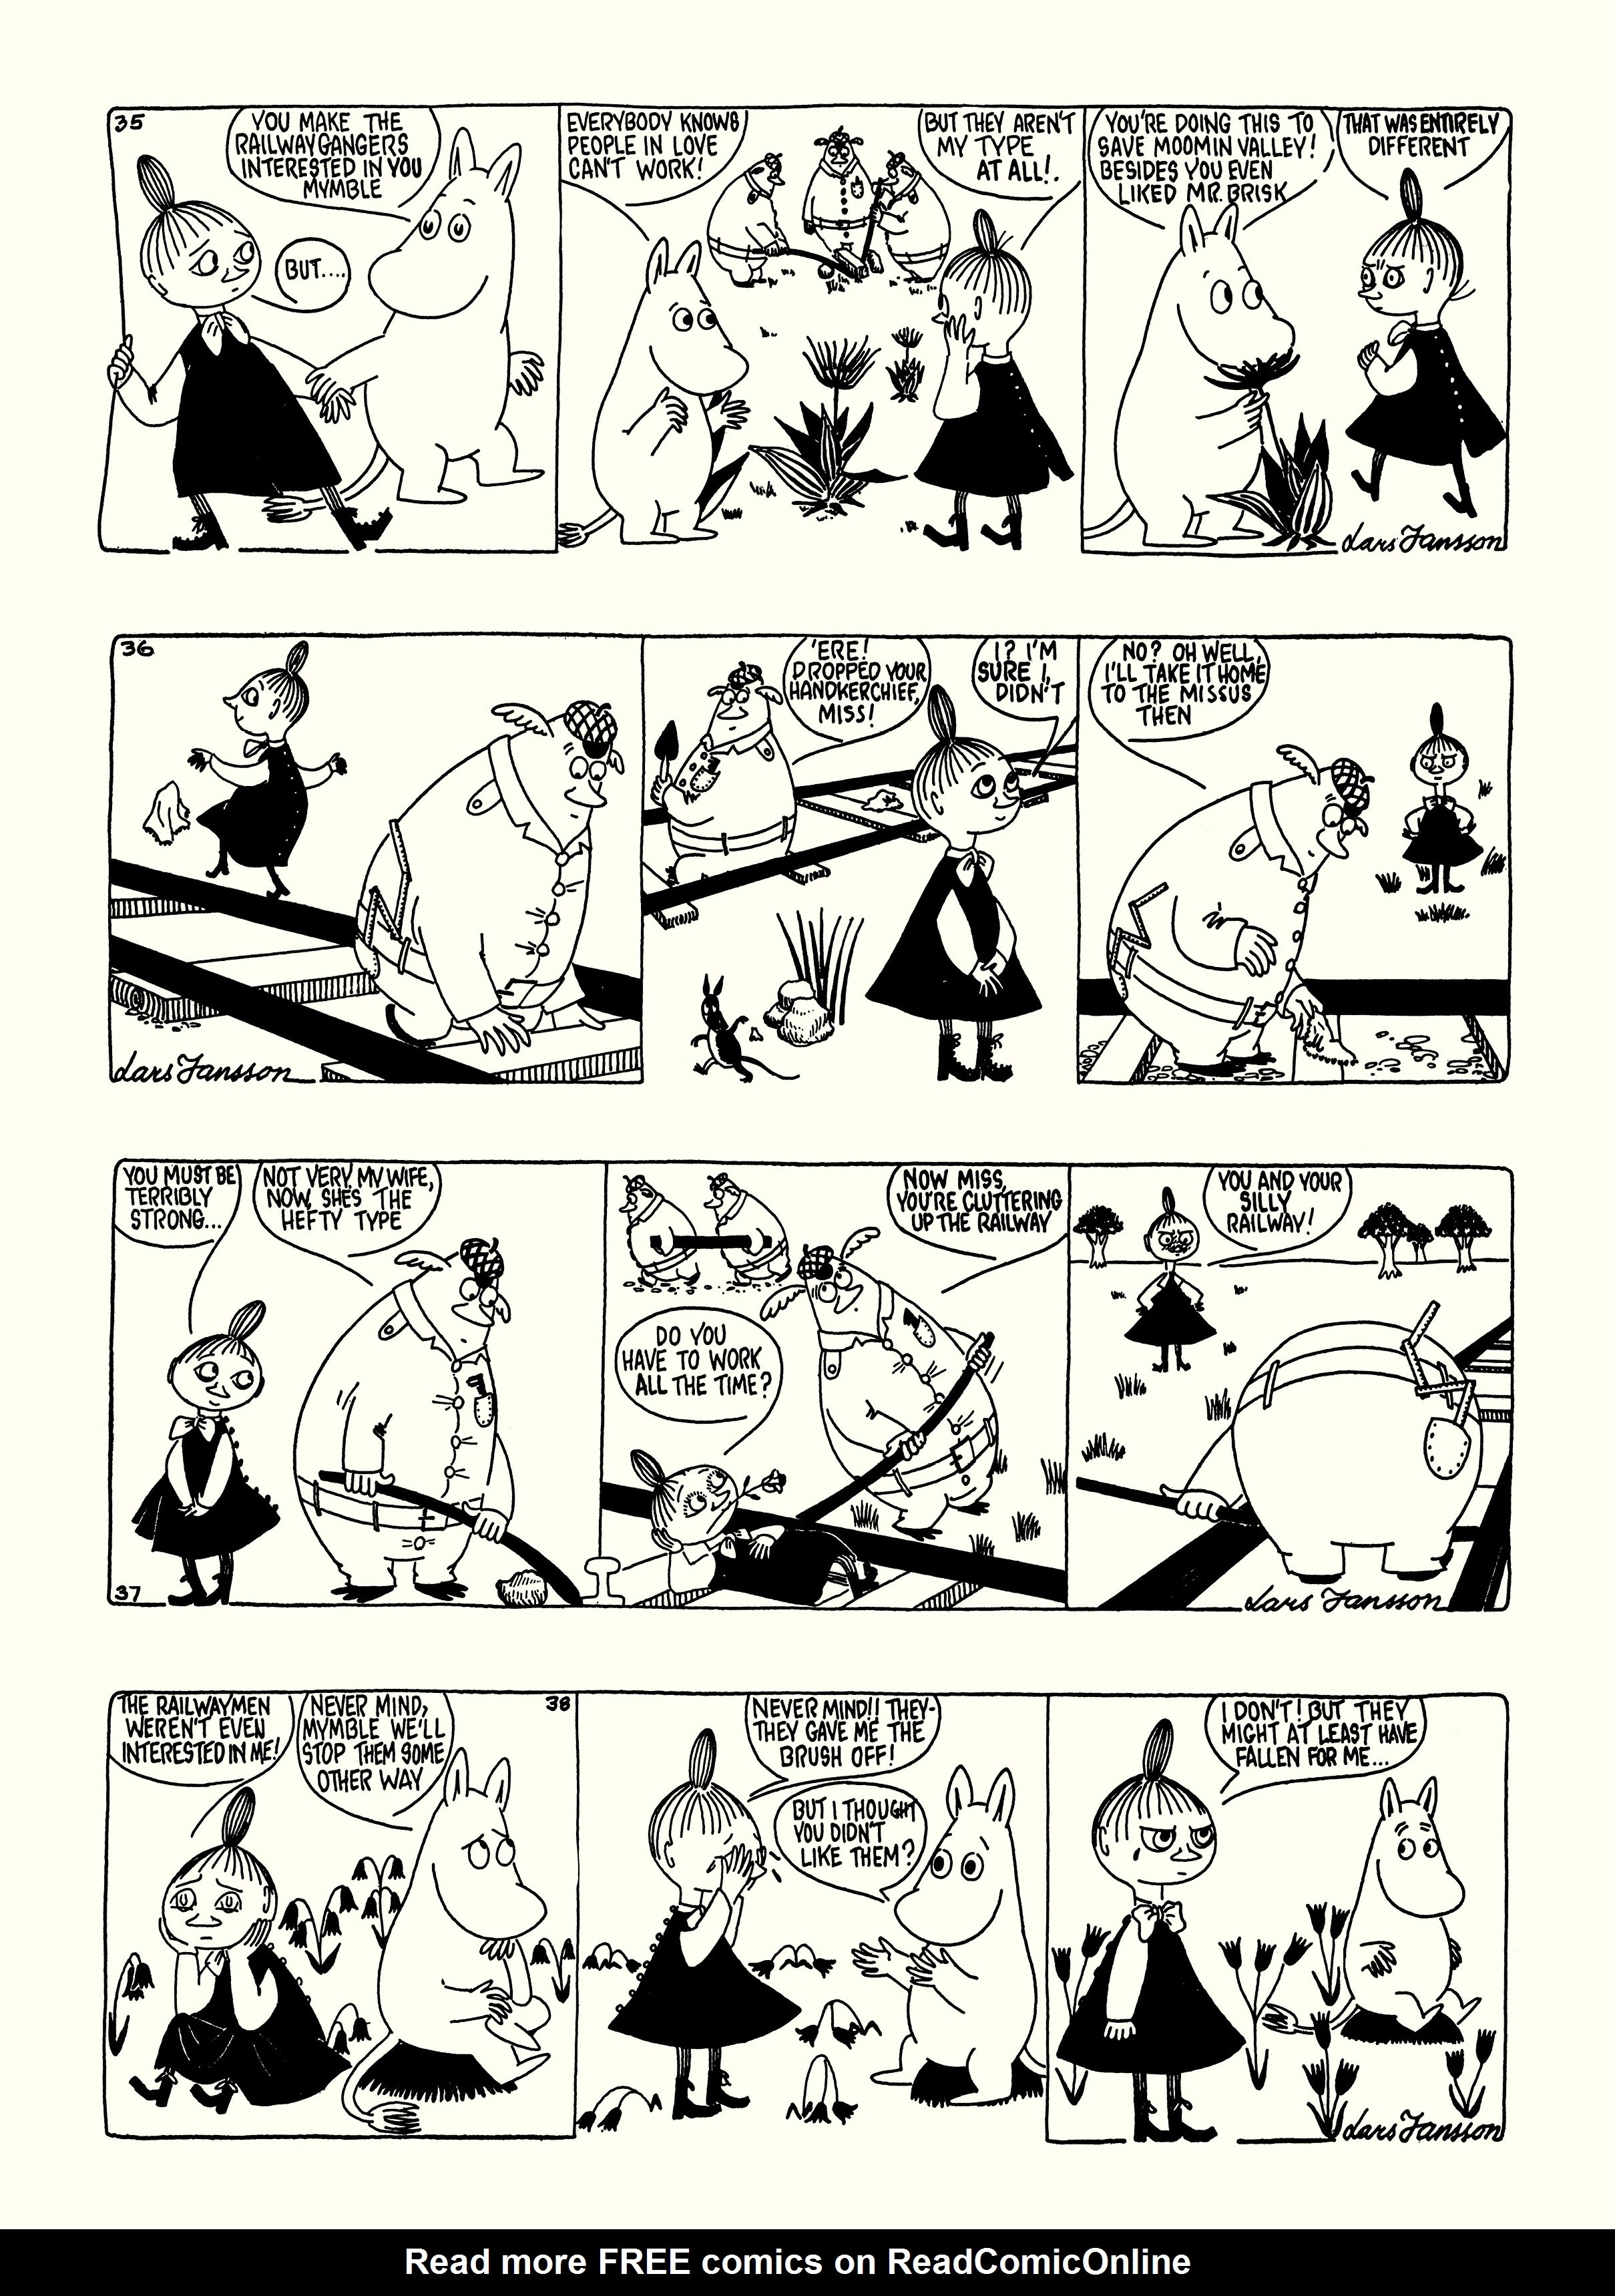 Read online Moomin: The Complete Lars Jansson Comic Strip comic -  Issue # TPB 6 - 35